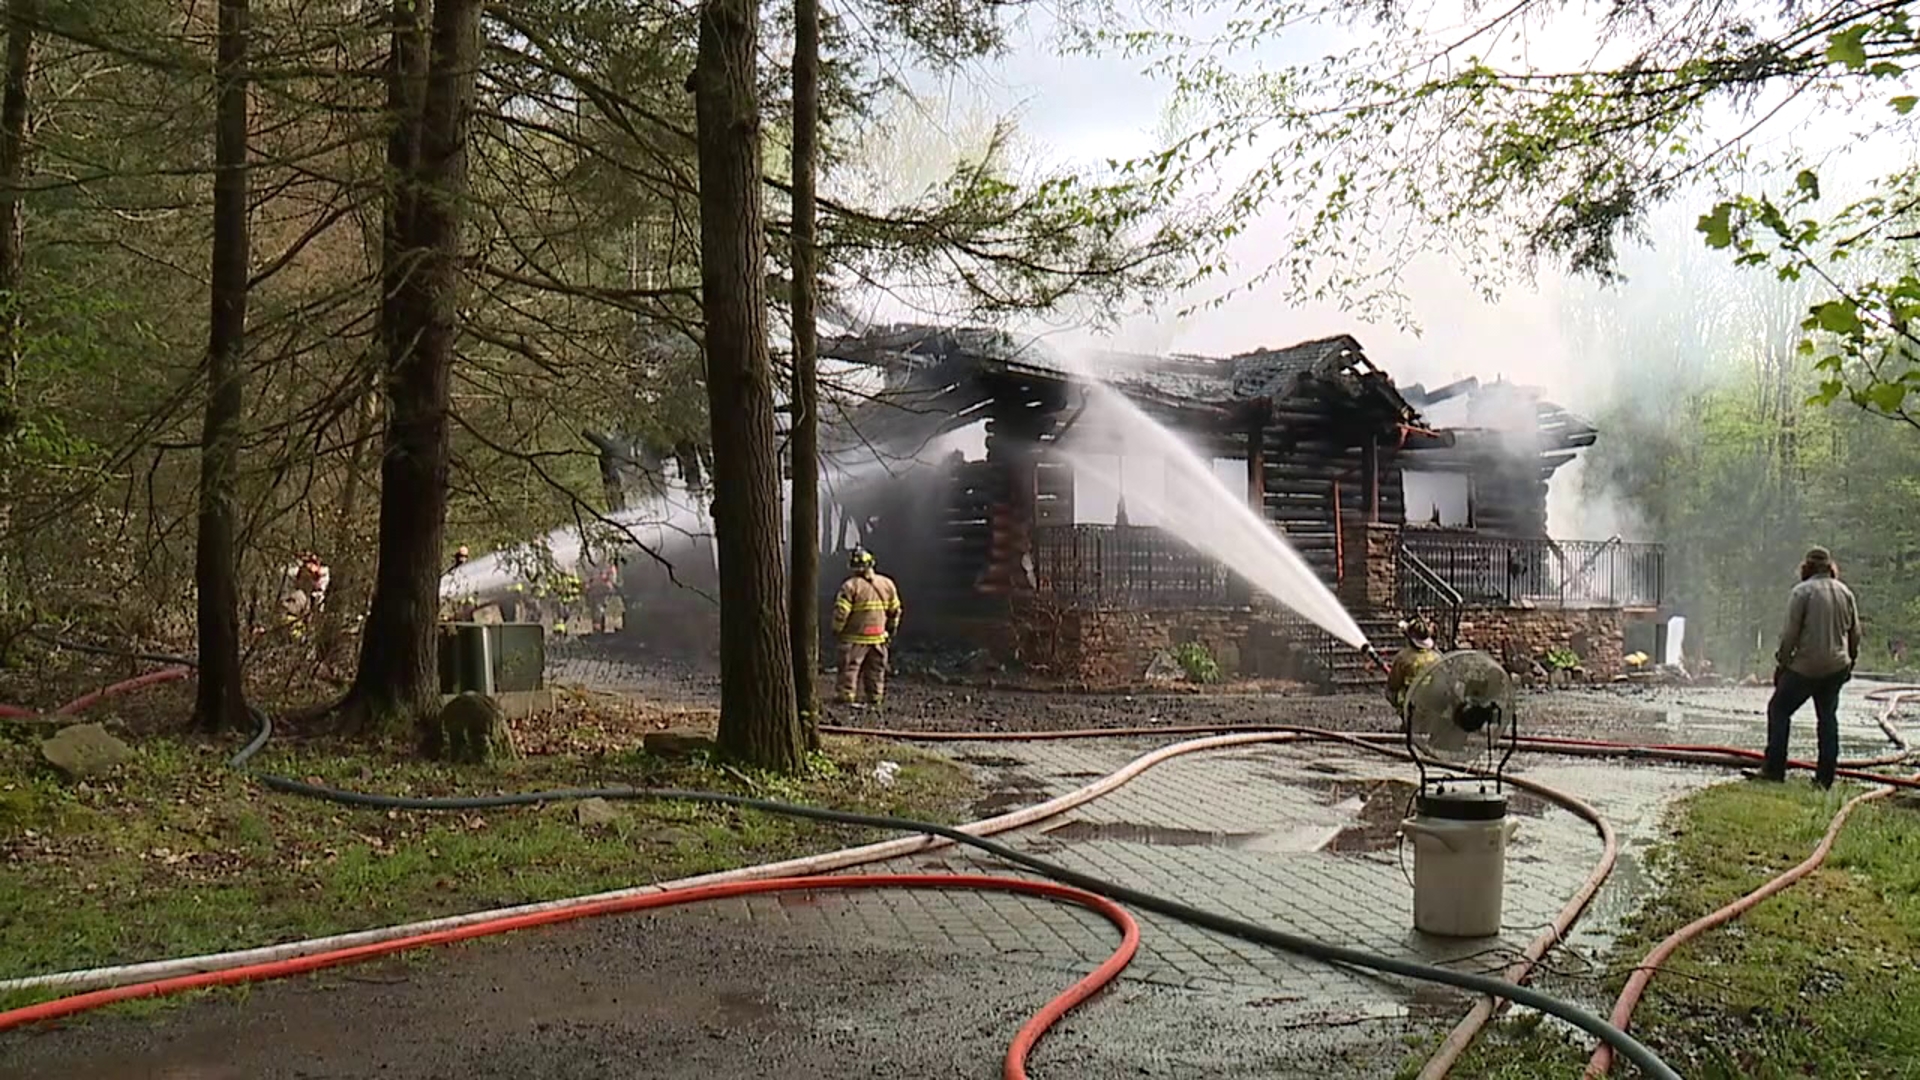 Flames broke out around 4:30 p.m. Monday along Trojan Road in Lehman Township.